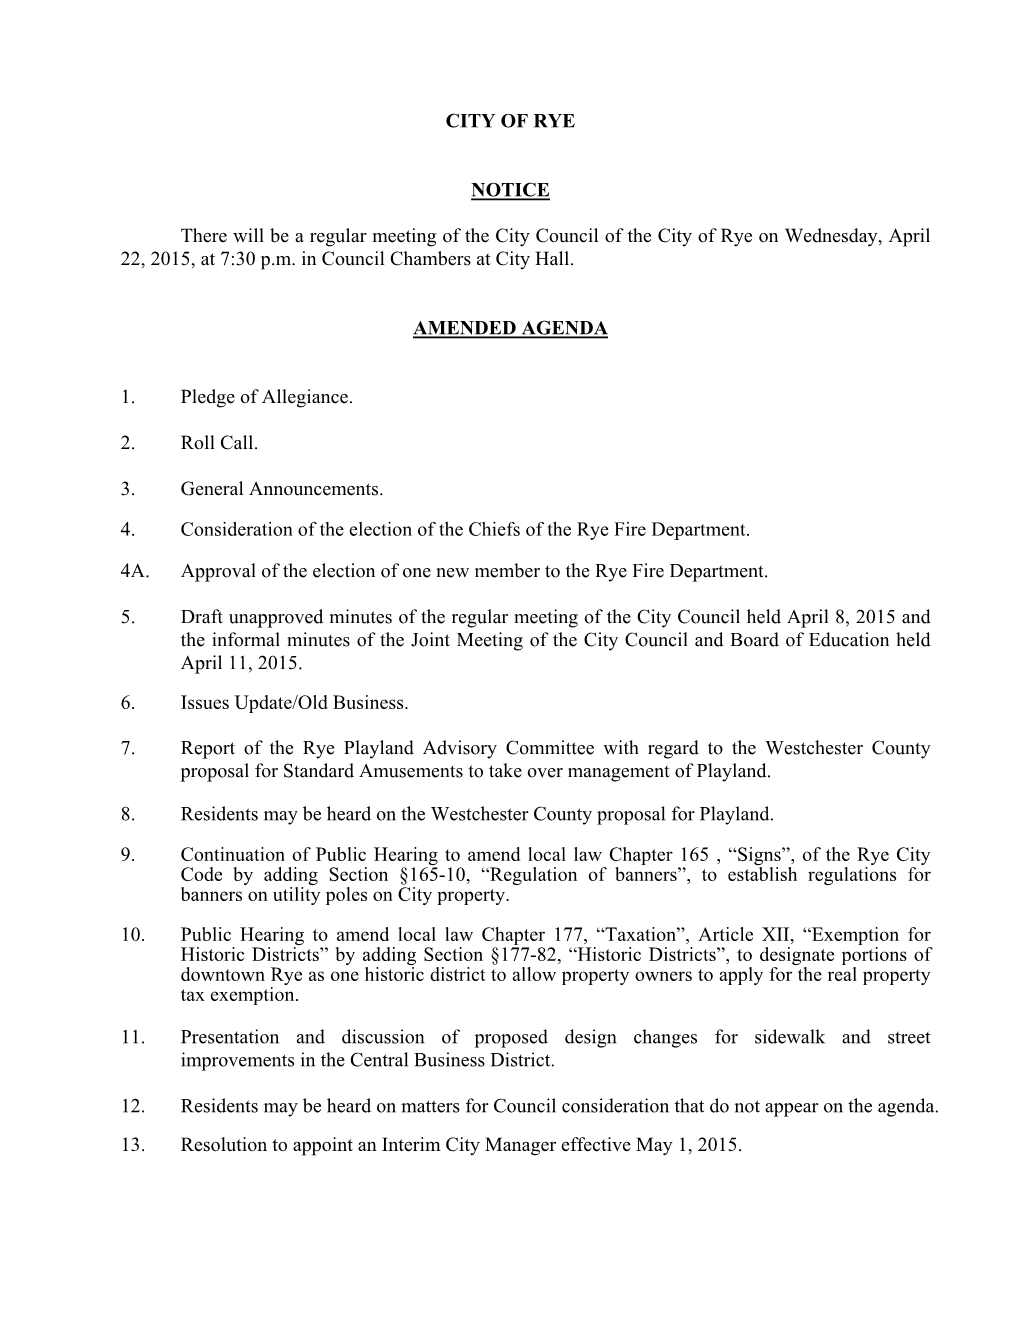 CITY of RYE NOTICE There Will Be a Regular Meeting of the City Council